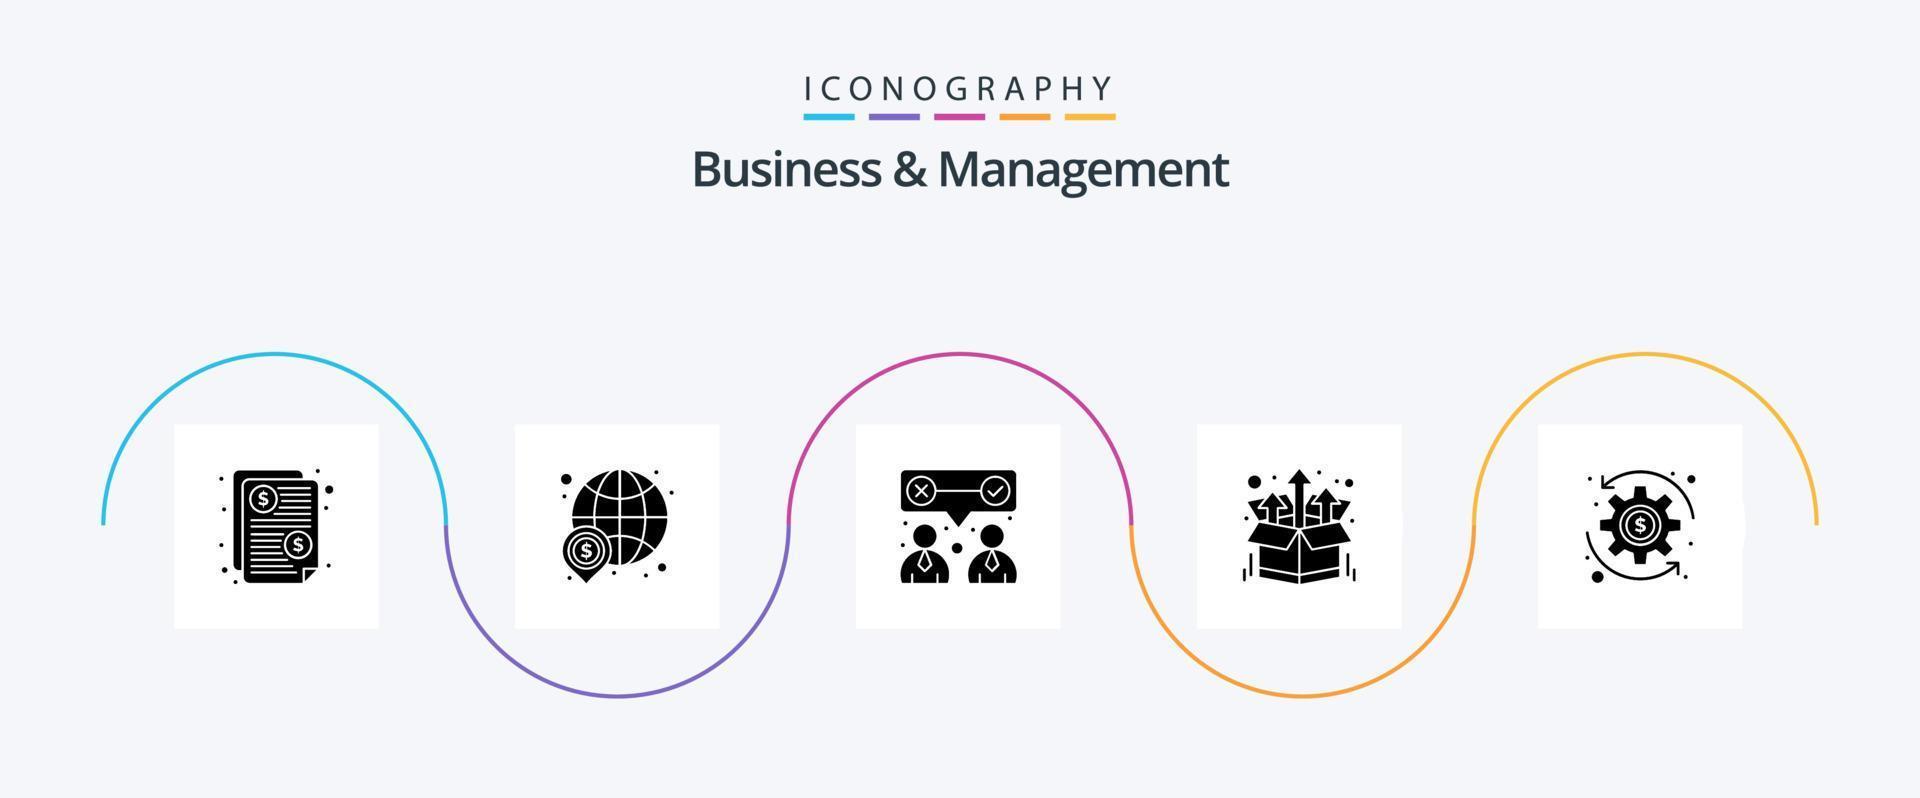 Business And Management Glyph 5 Icon Pack Including coin. product. world. package. team work vector